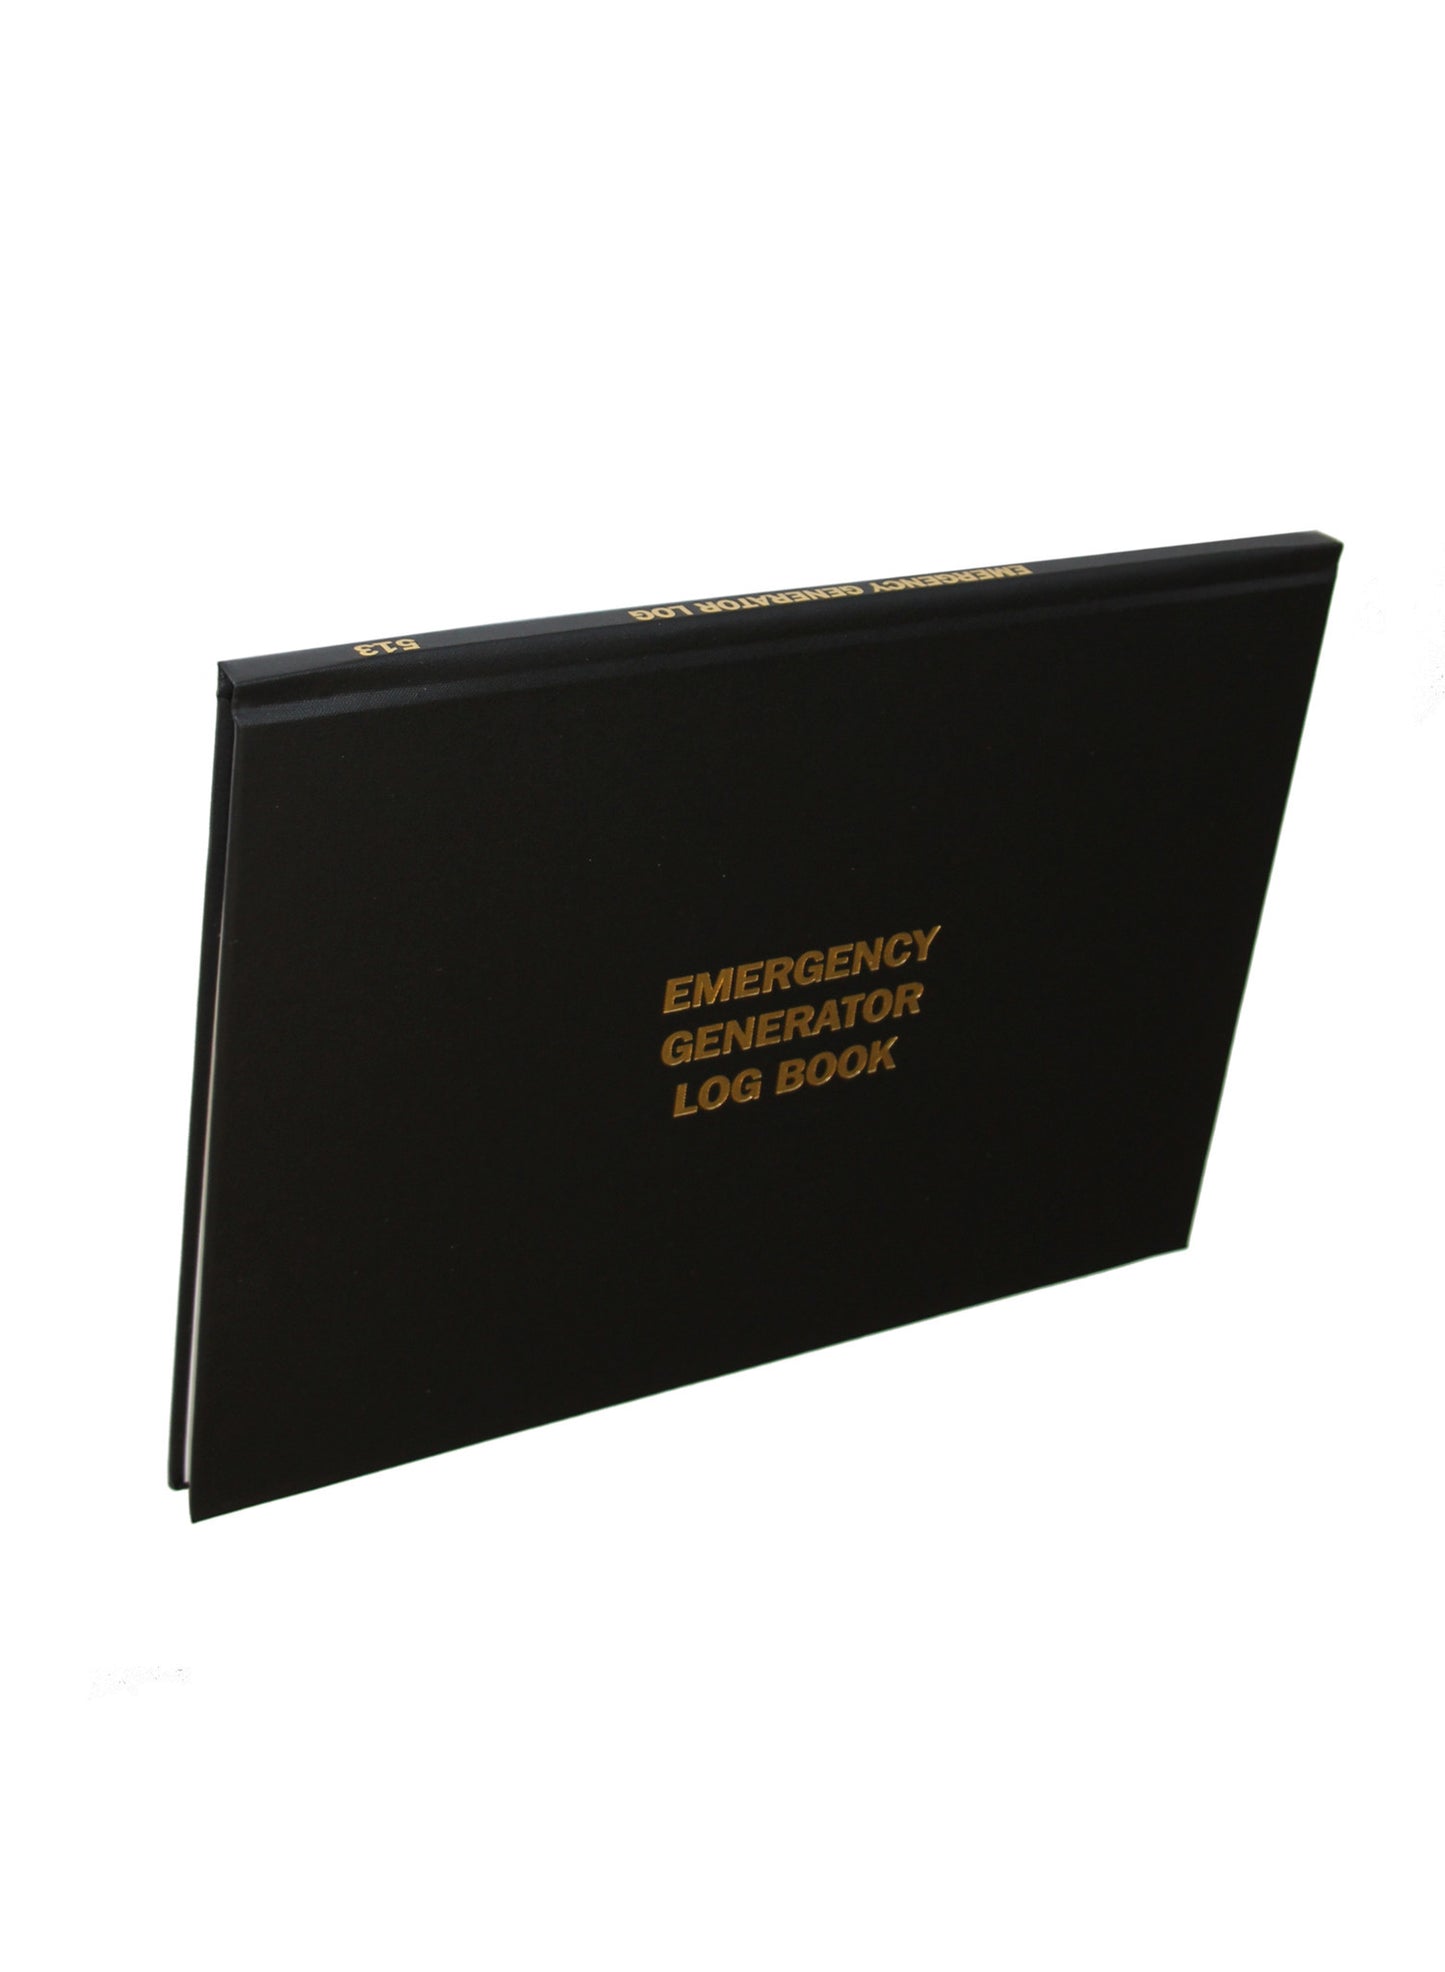 Front cover of a black Log Book with text in gold stating "Emergency Generator Log Book"